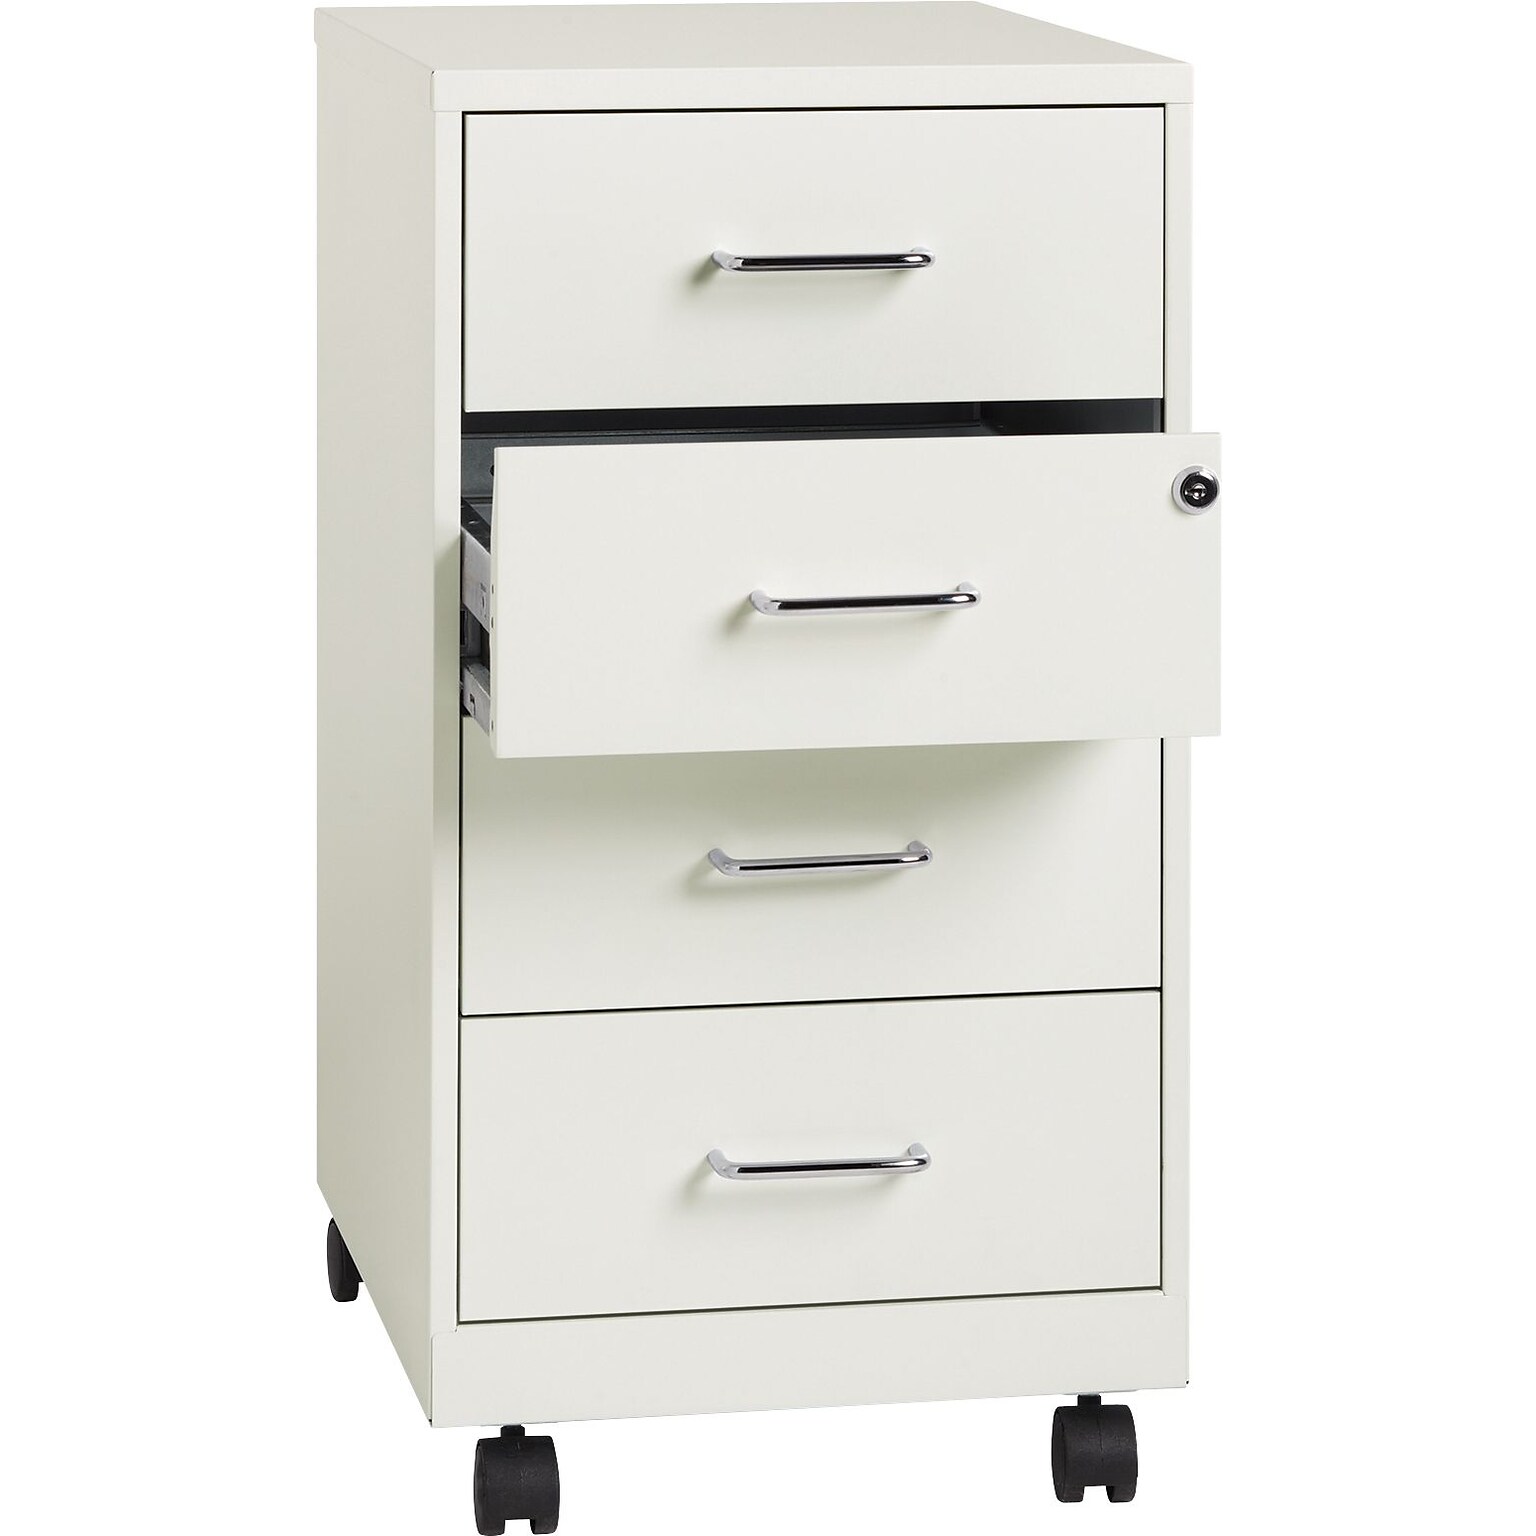 Space Solutions 4-Drawer Mobile Box Drawer Organizer for Office Supplies and Crafts, White, 18 Deep (19537)